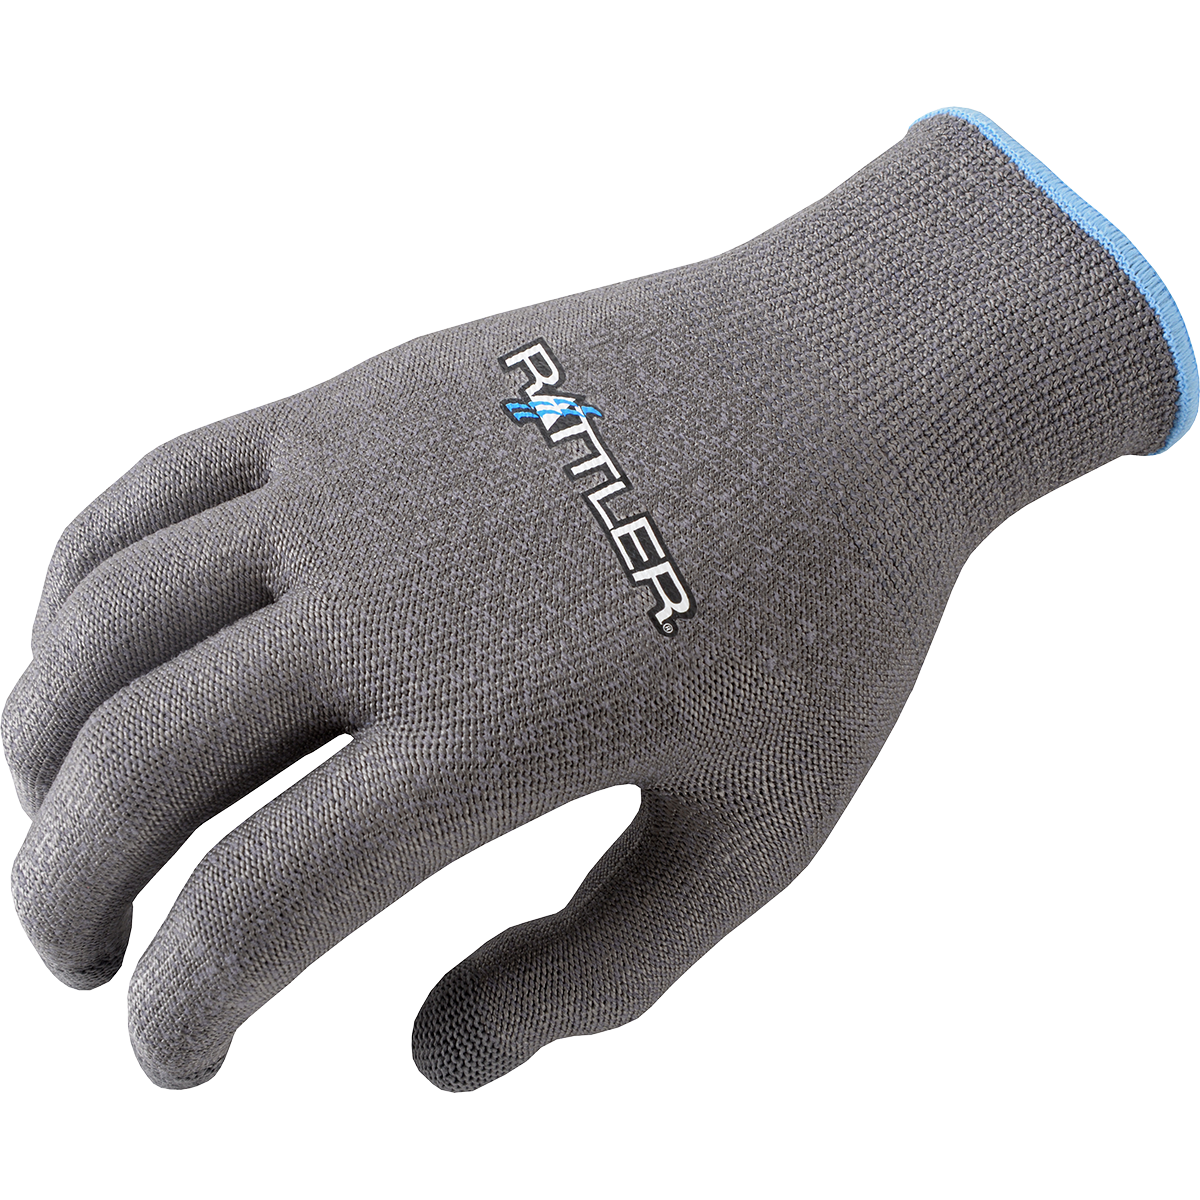 Classic Rope Company Grey Rattler Horse Equine Roping Glove